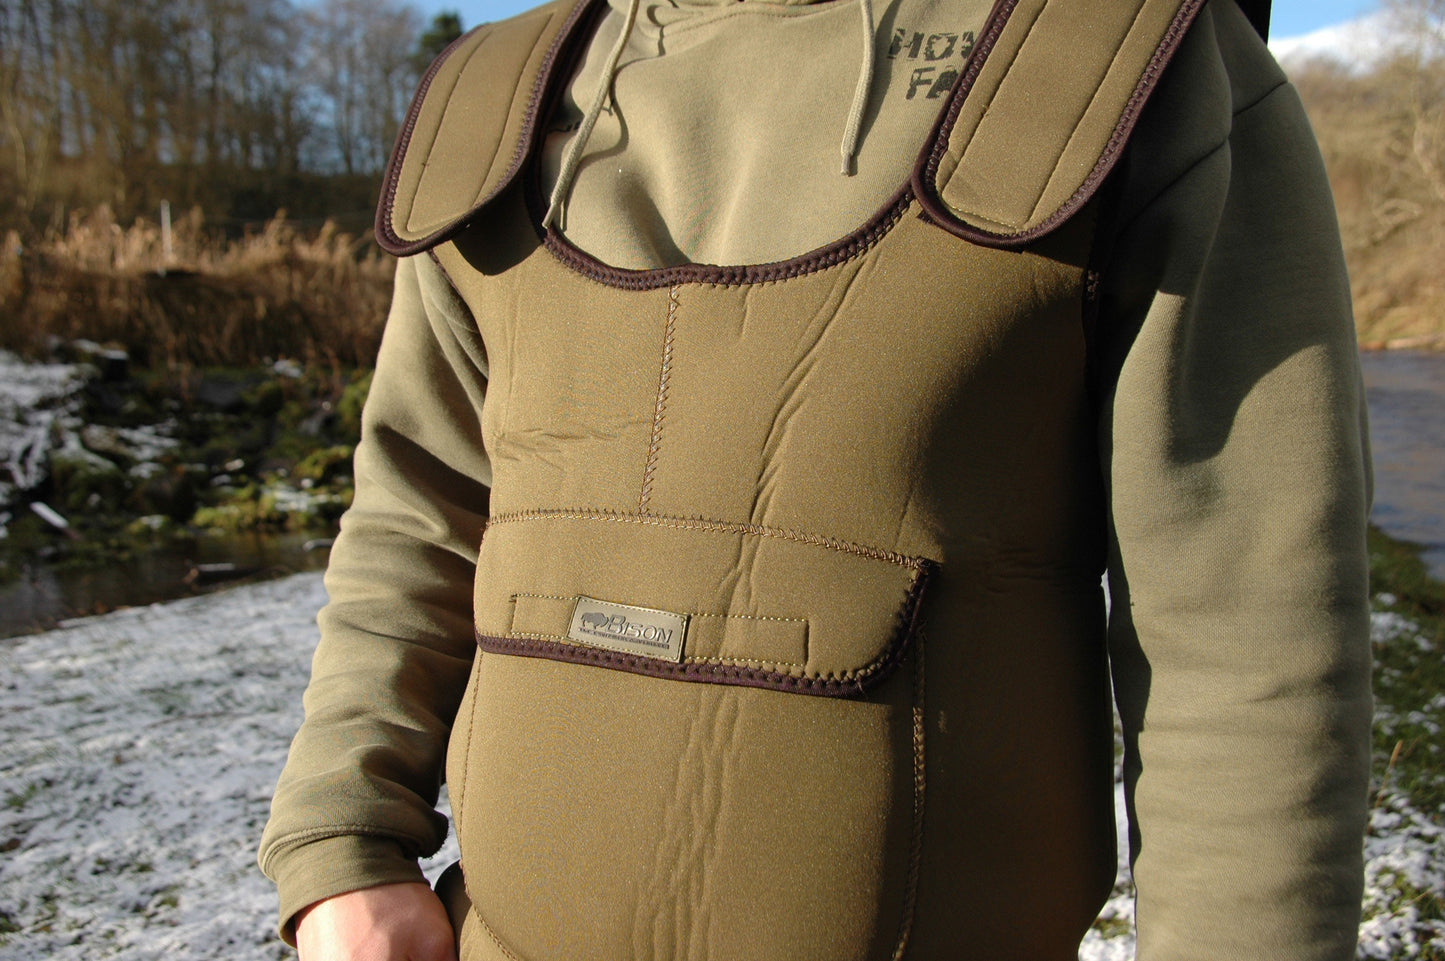 NEOPRENE CHEST WADERS, BISON 5mm FULL BODIED